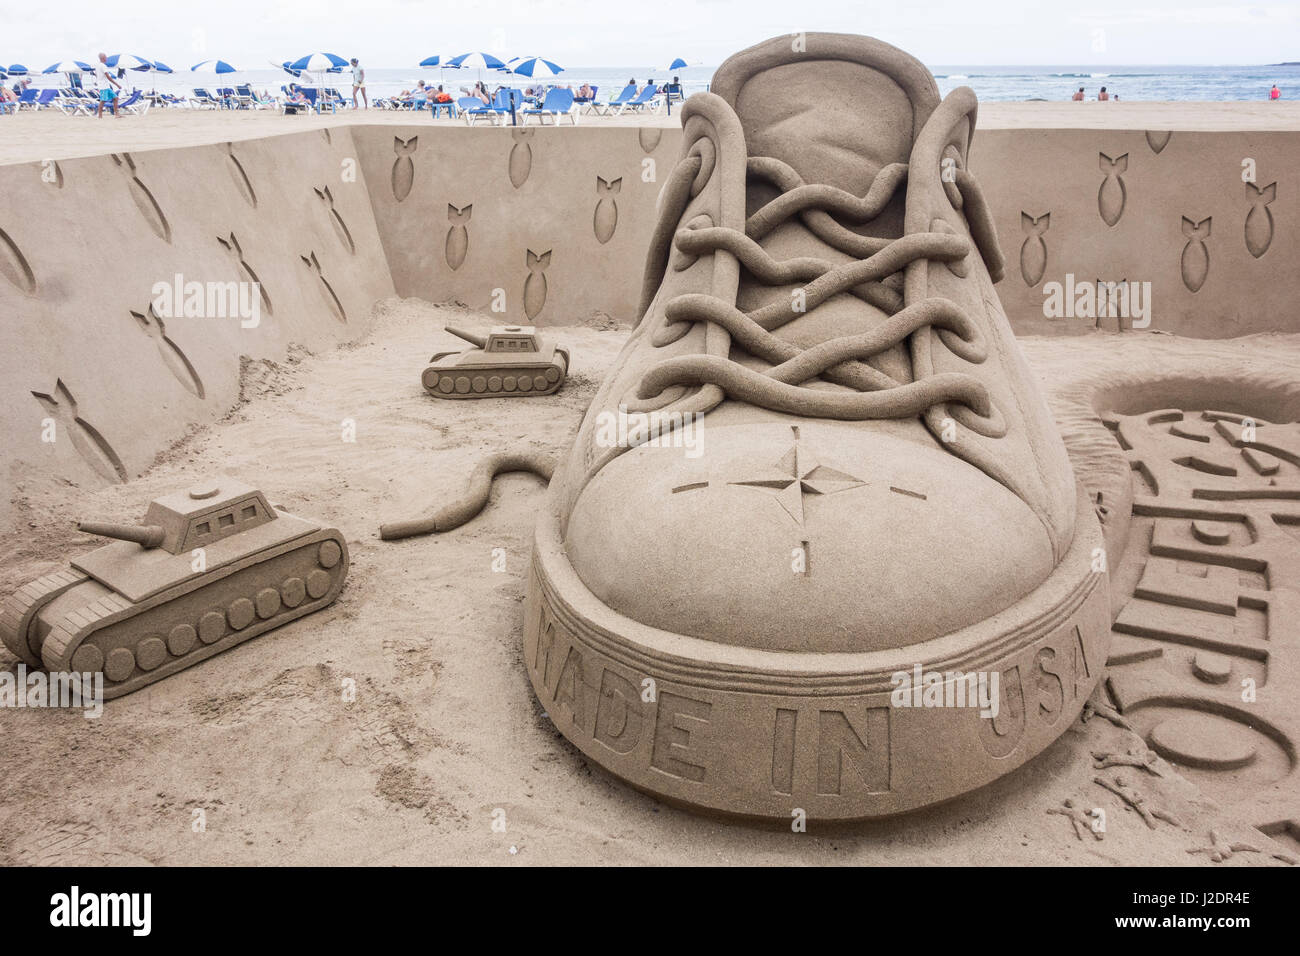 Las Palmas, Gran Canaria, Canary Islands, Spain. 28th April, 2017. Sand sculptor Etua Ojeda`s works nearly always have a social/political message. This anti 'imperialistic' sculpture on the city beach is called 'Criminal Footprint'. Quote from sculptor: 'The sculpture deals with the political reality in a symbolic way through the footprint left by the imperialist power and its allies, all of them governed by the economic powers in the shadows, pulling the strings of western political parties and their puppet politicians'. Credit: ALAN DAWSON/Alamy Live News Stock Photo